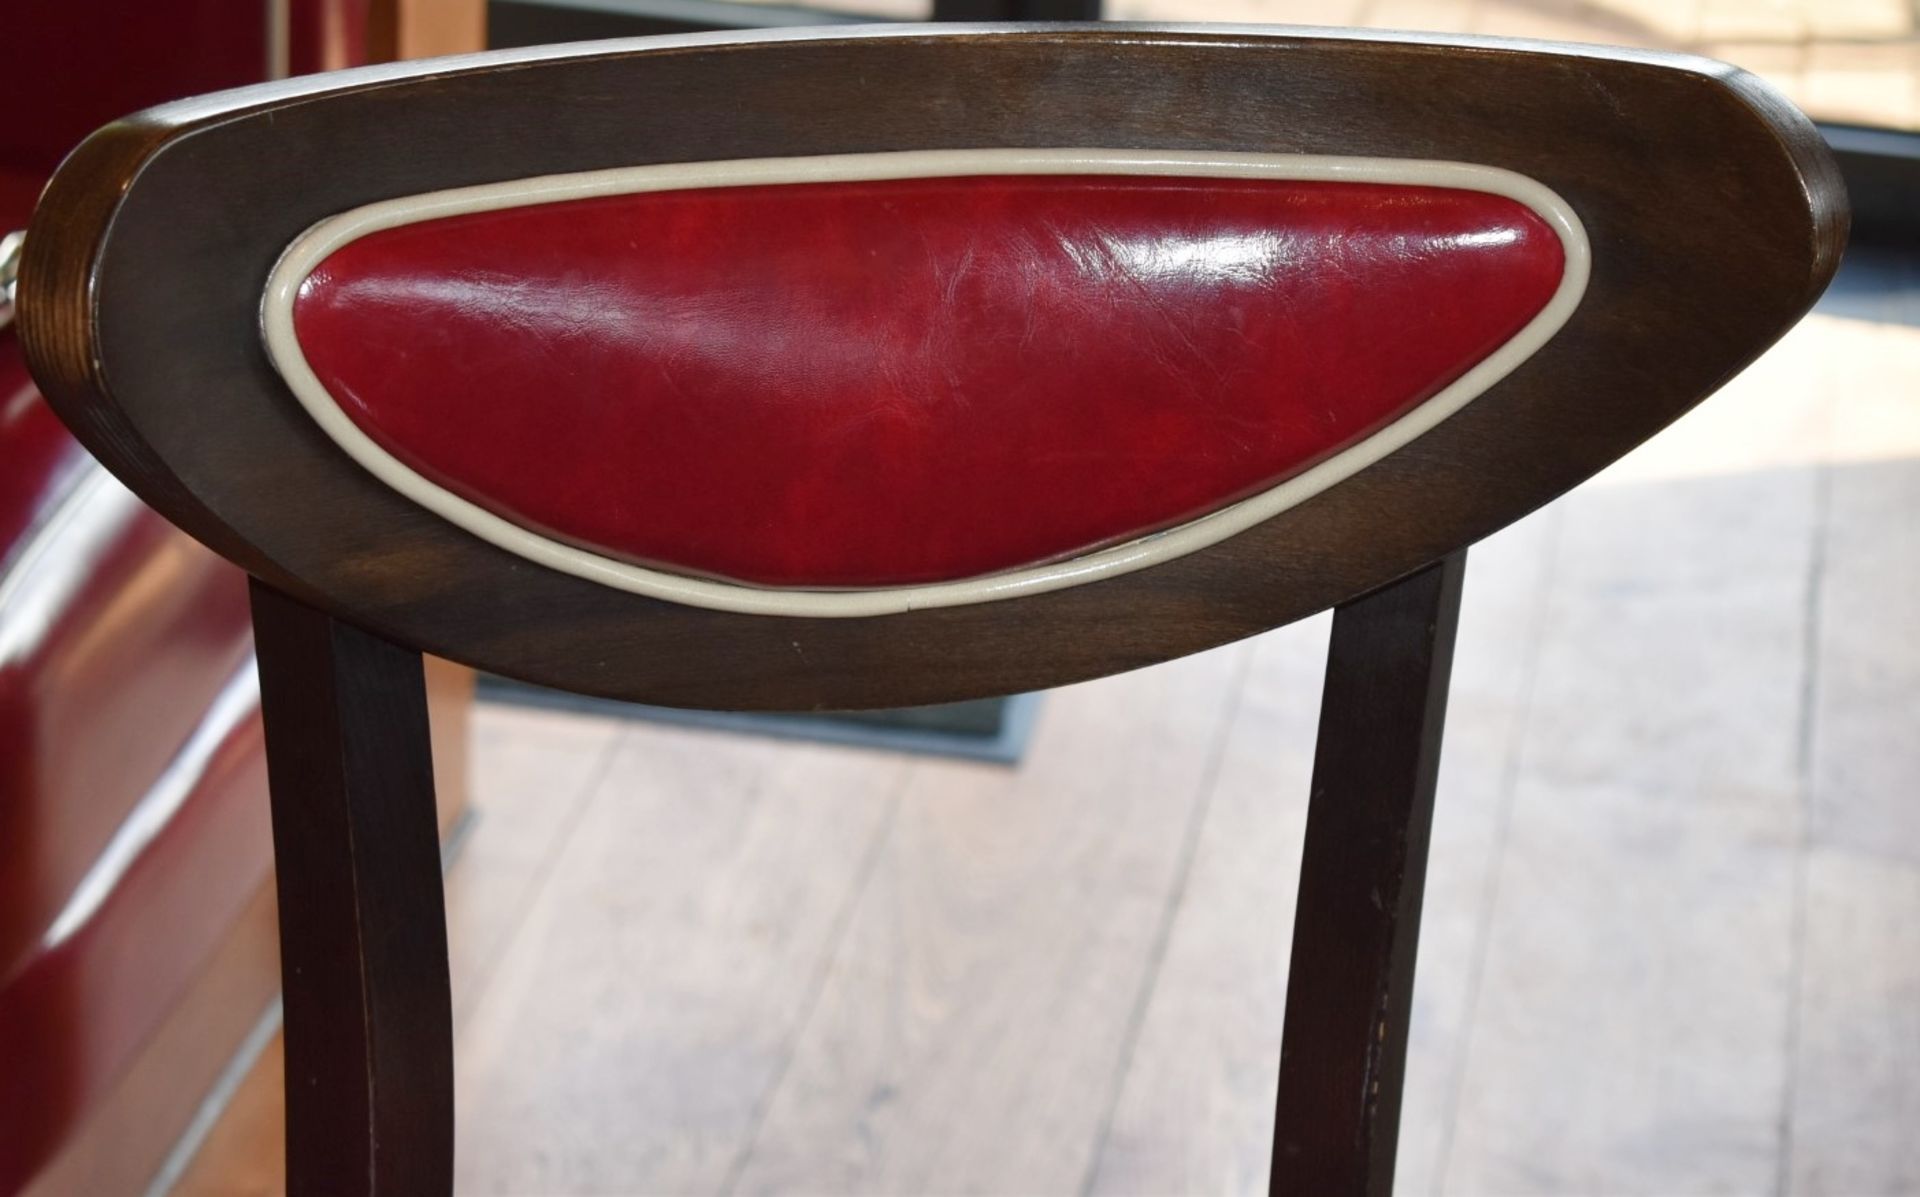 4 x Wine Red Faux Leather Bar Stools From Italian American Restaurant - Retro Design With Dark - Image 4 of 5